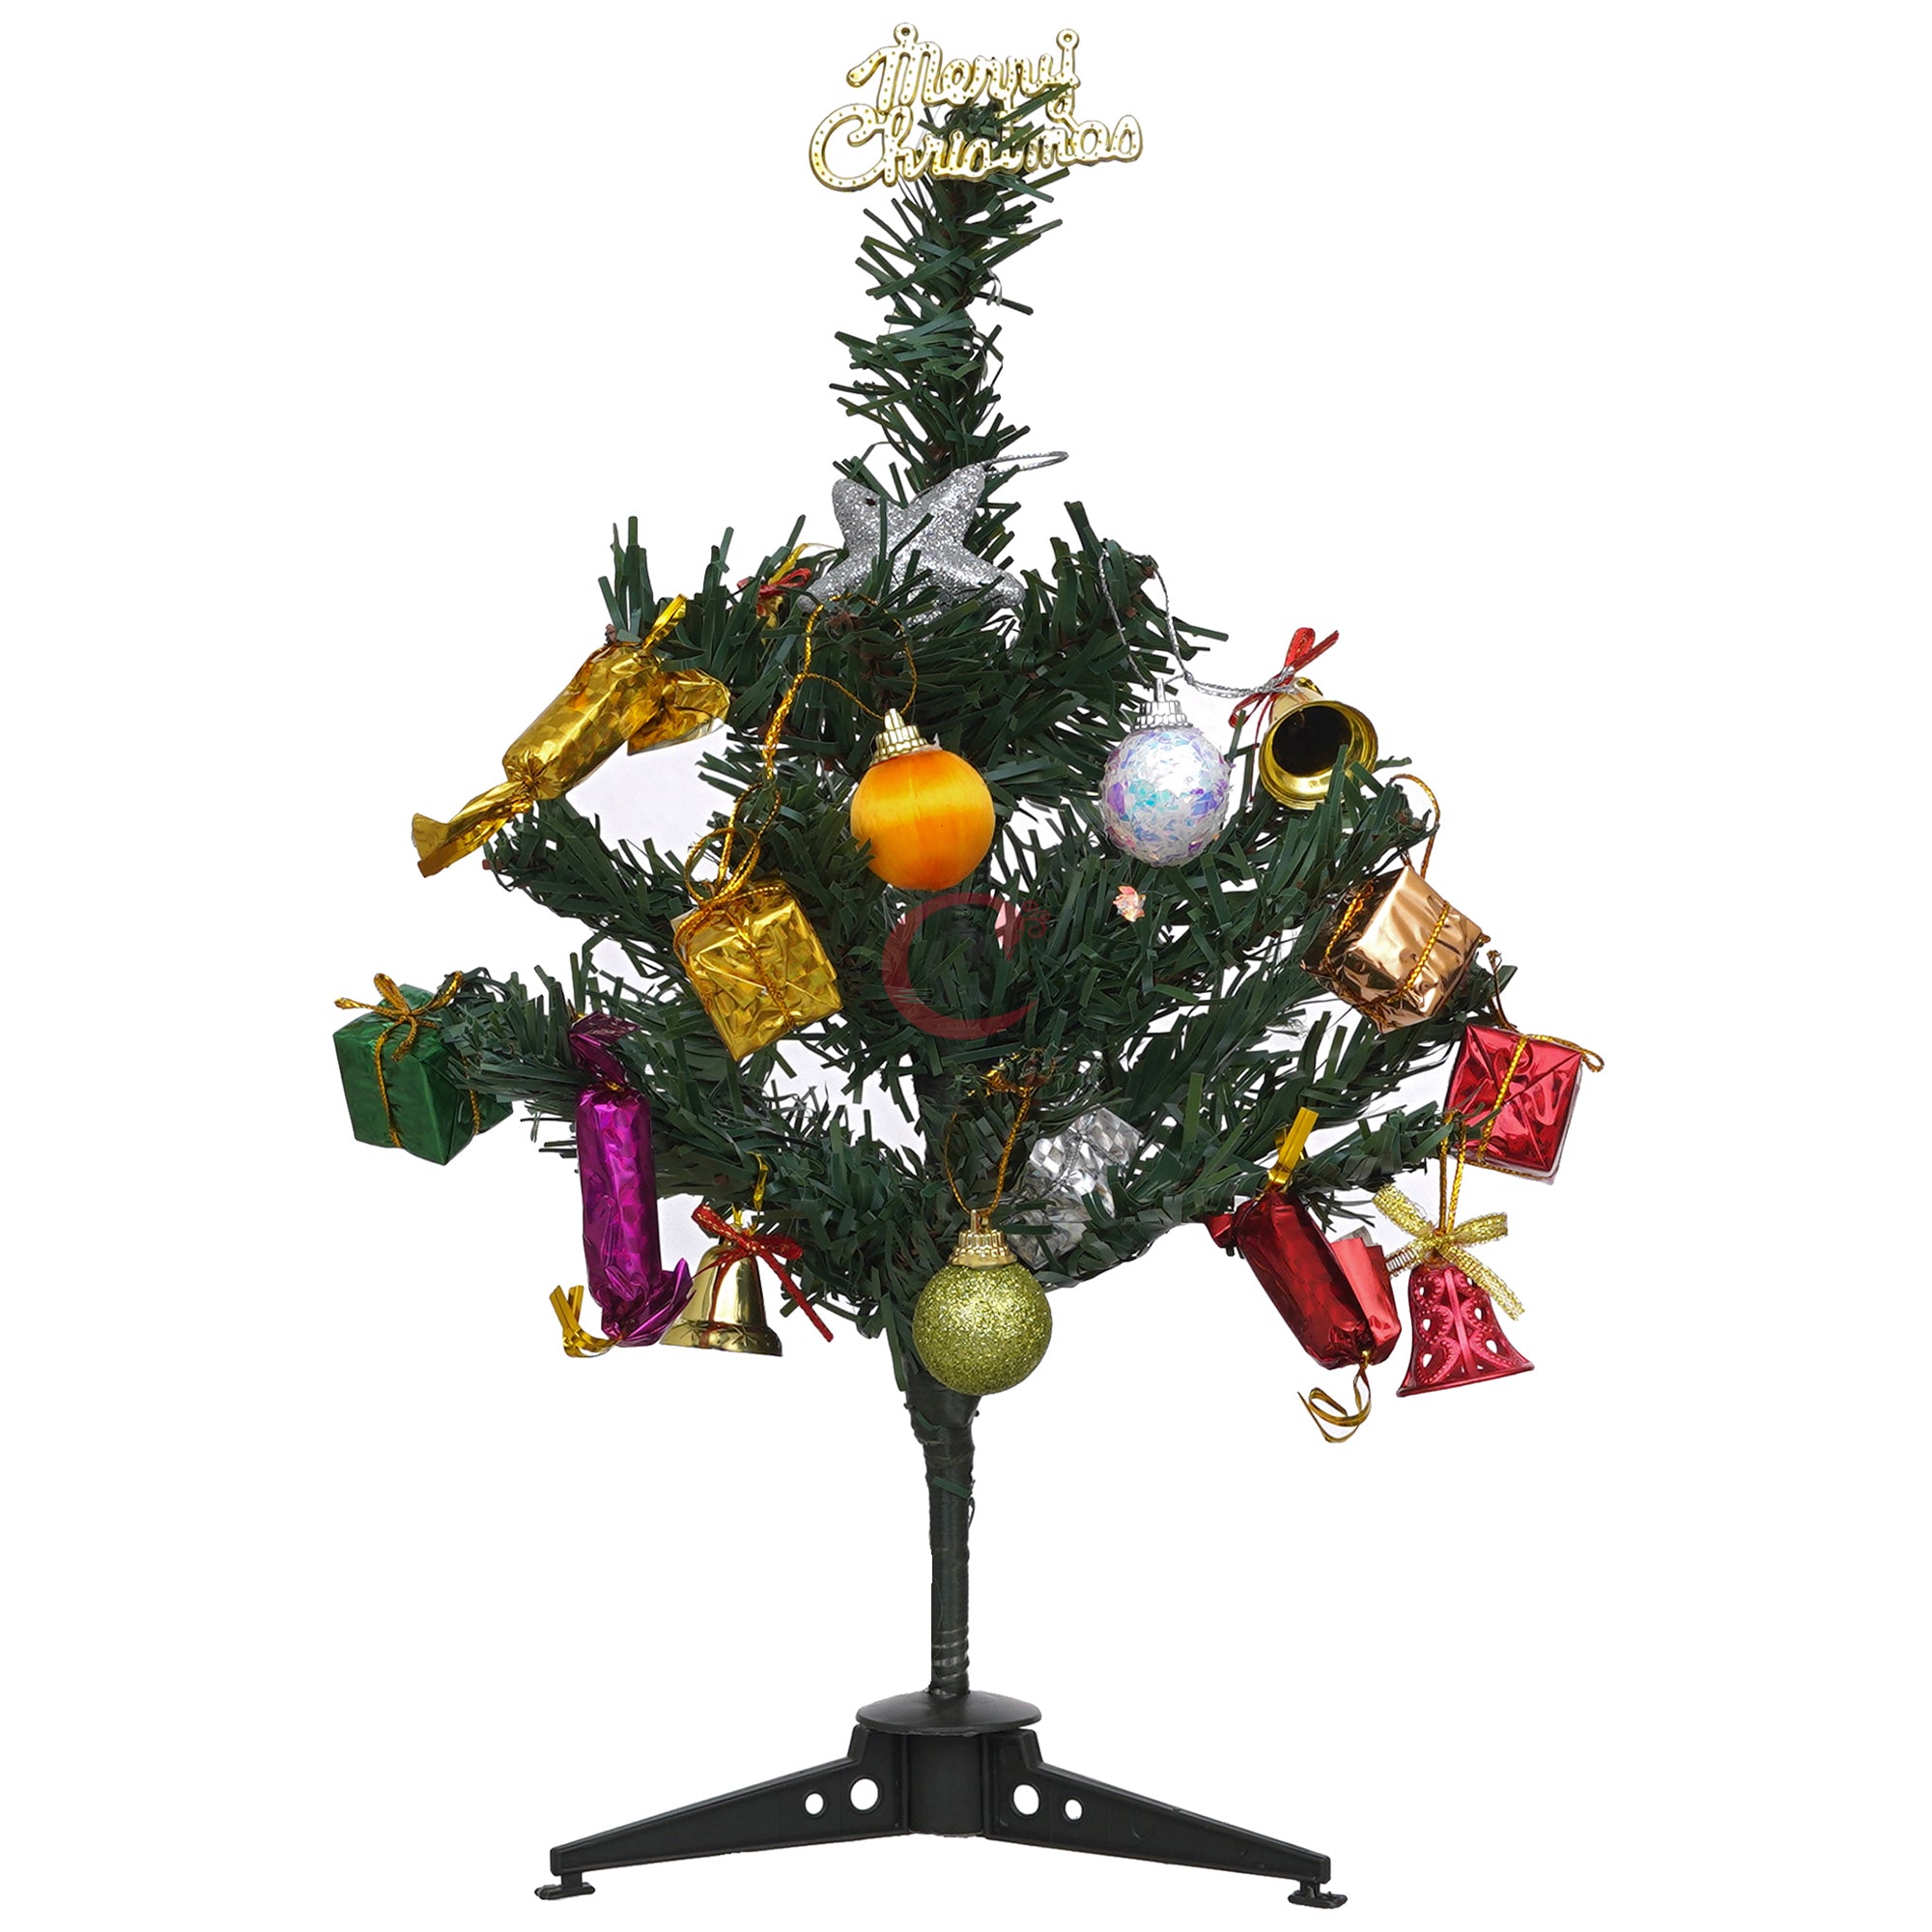 eCraftIndia 1 Feet Green Artificial Christmas Tree Xmas Pine Tree with Metal Stand - Xmas Tree for Indoor, Outdoor, Home, Living Room, Office, Church Decor - Merry Christmas Decoration Item 6